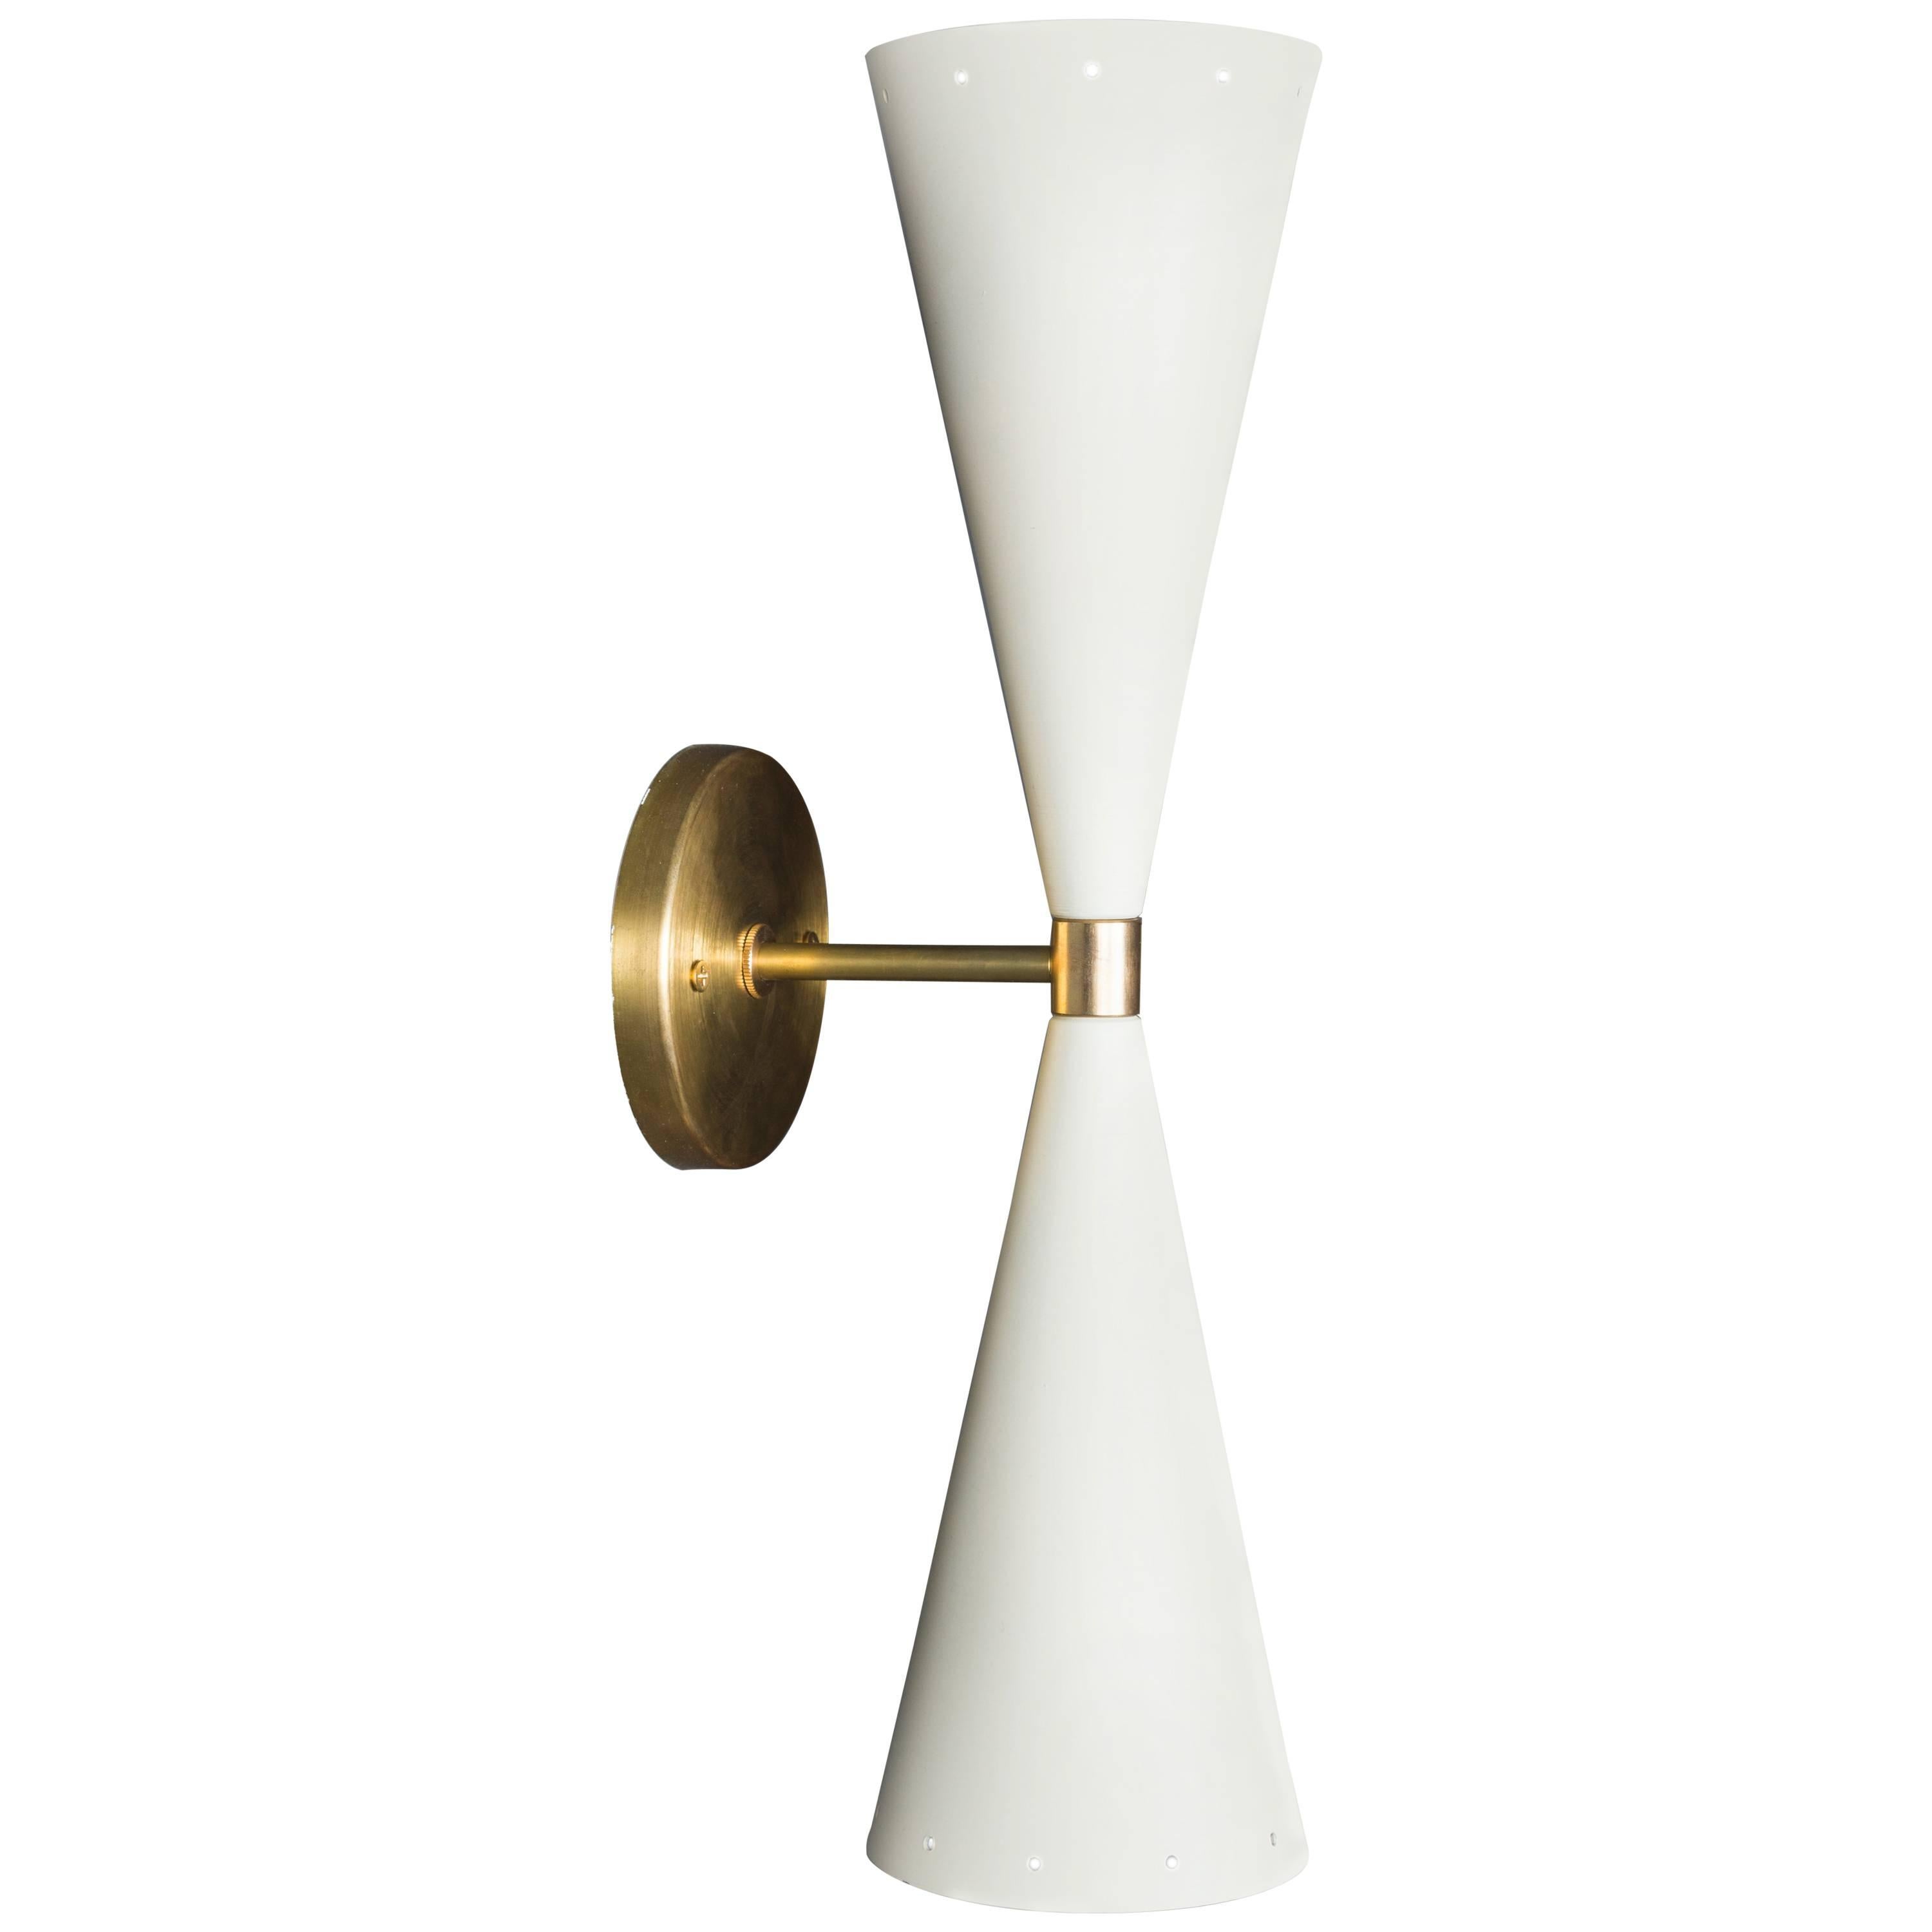 The double cone sconce features two tapered cones, in either black or white, with small perforations at both ends with a brass backplate and spacer. Shown here in white powdercoat and satin brass. Also comes in black. 

The Lawson-Fenning Collection